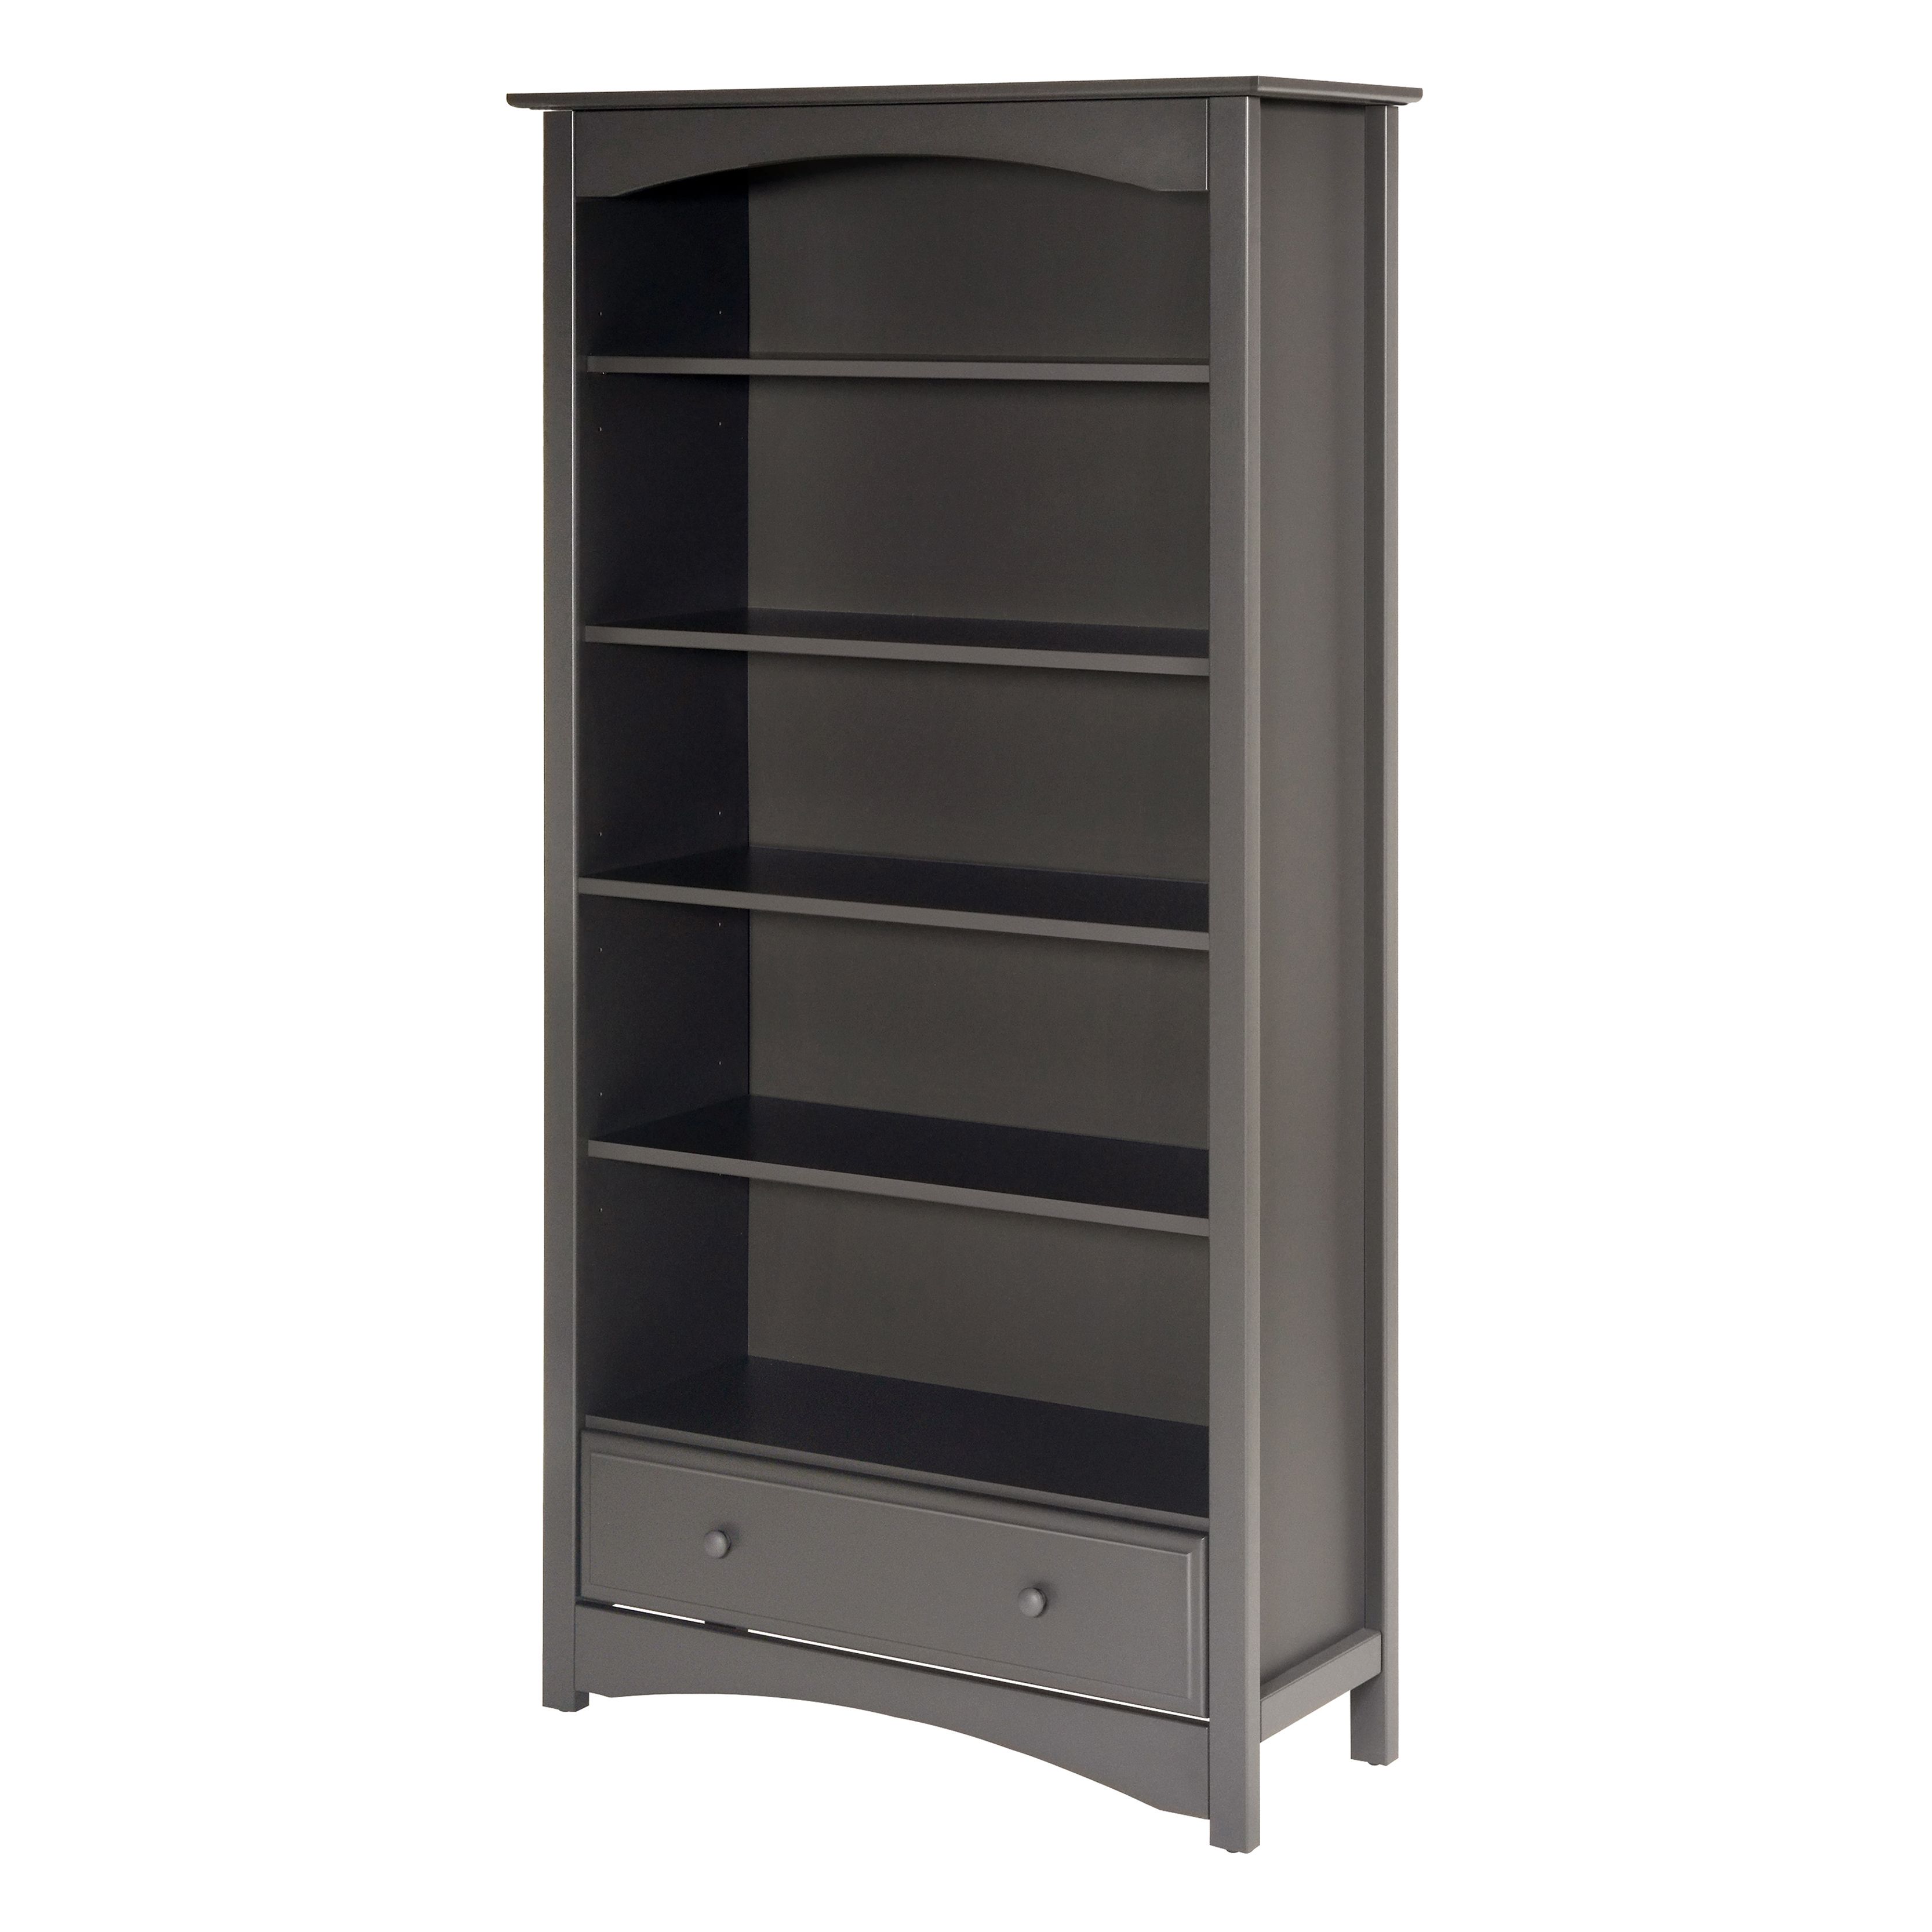 Most Recently Released Davinci Mdb Bookcase In White Finish In Mdb Standard Bookcases (View 16 of 20)